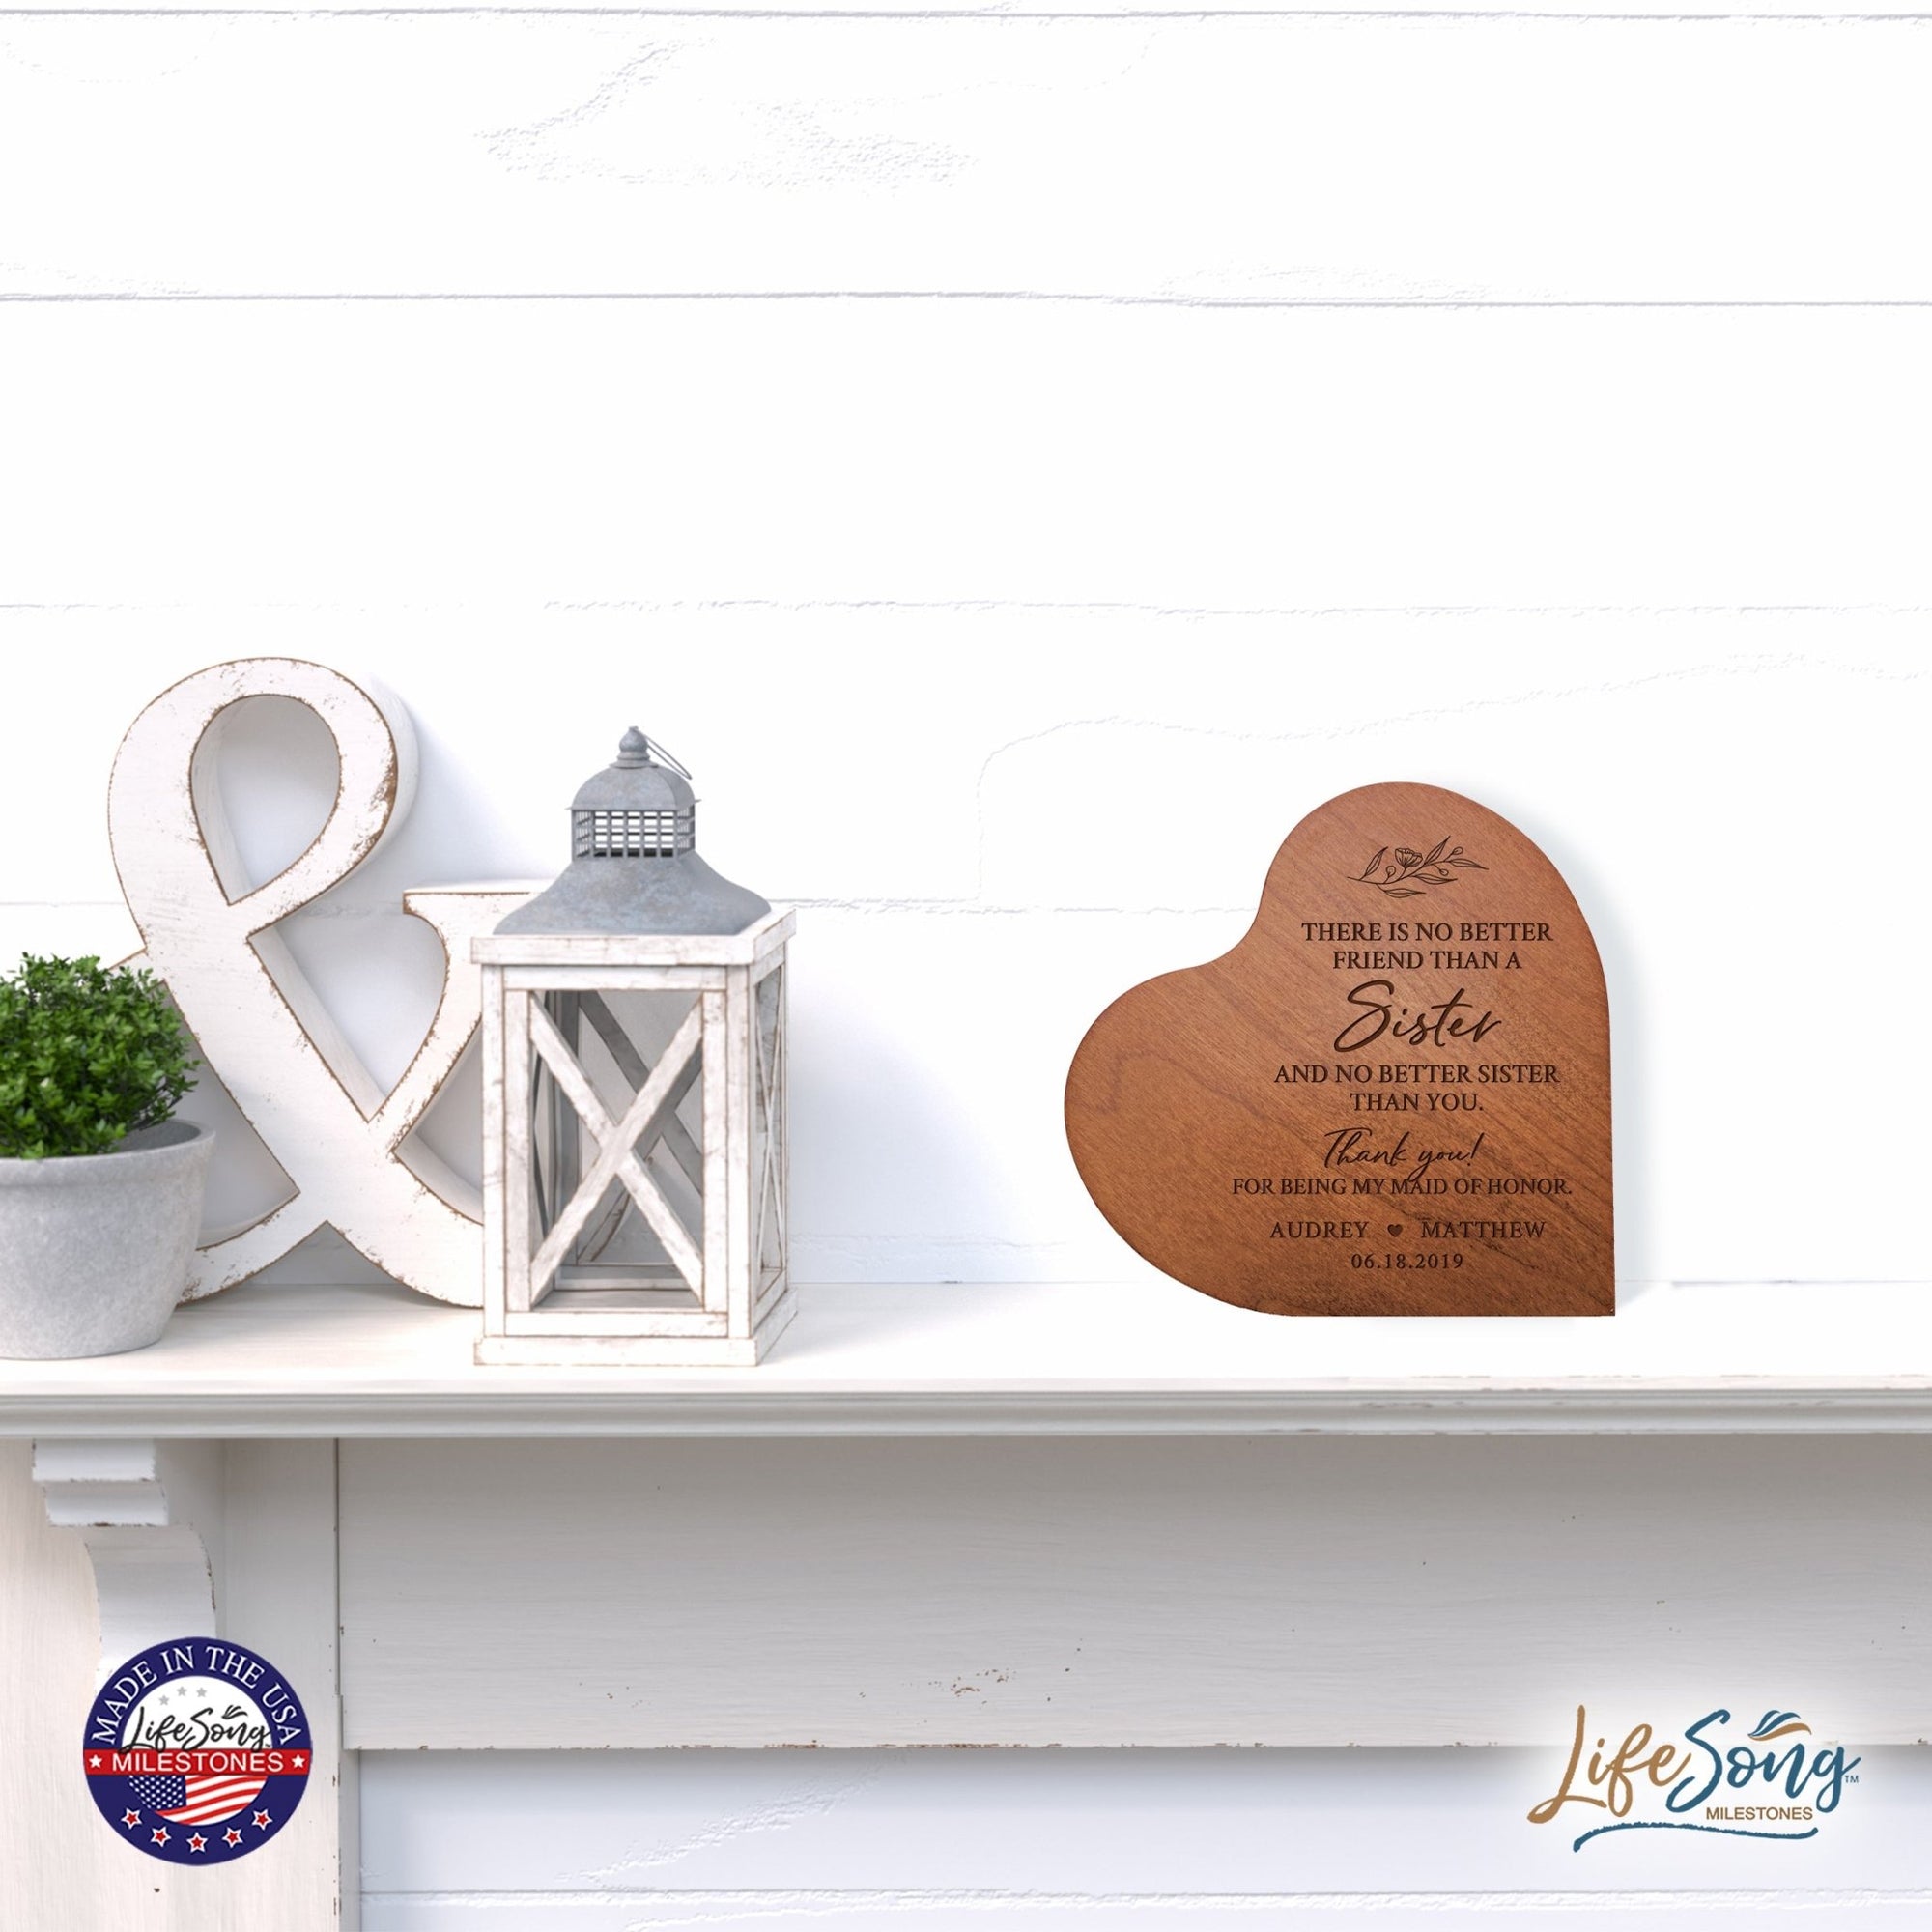 Personalized Sister’s Love Wooden Solid Wood Heart Decoration With Inspirational Verse 5x5.25 - There Is No Better - LifeSong Milestones